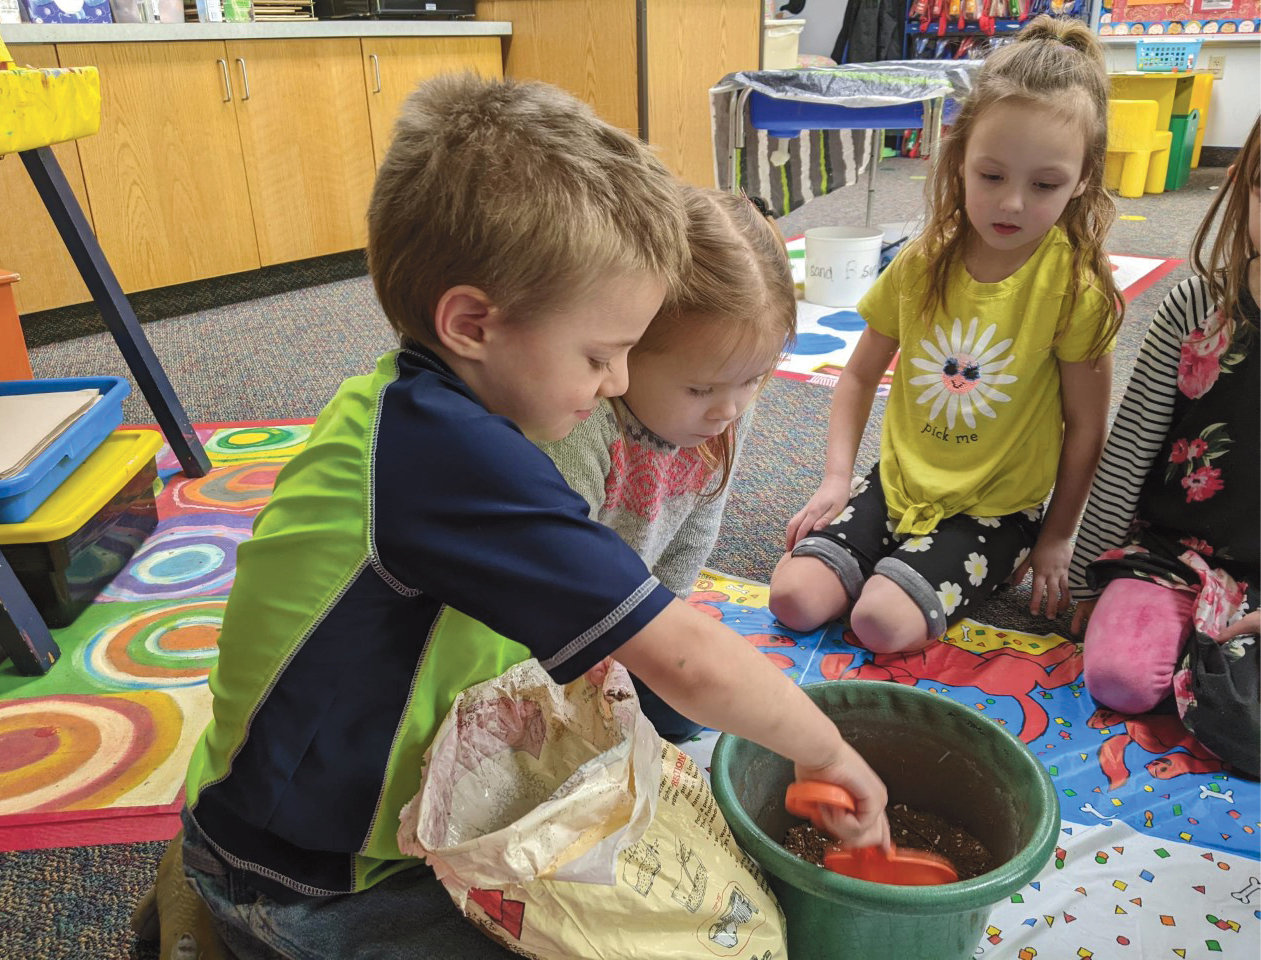 Iroquois preschoolers listened to the book "The Missing Mitten Mystery" by Steven Kellogg. Afterward, Sammy Bretz, left, Raea Guthmiller and Savannah Driggers planted a mitten, hoping it will grow into a mitten tree.